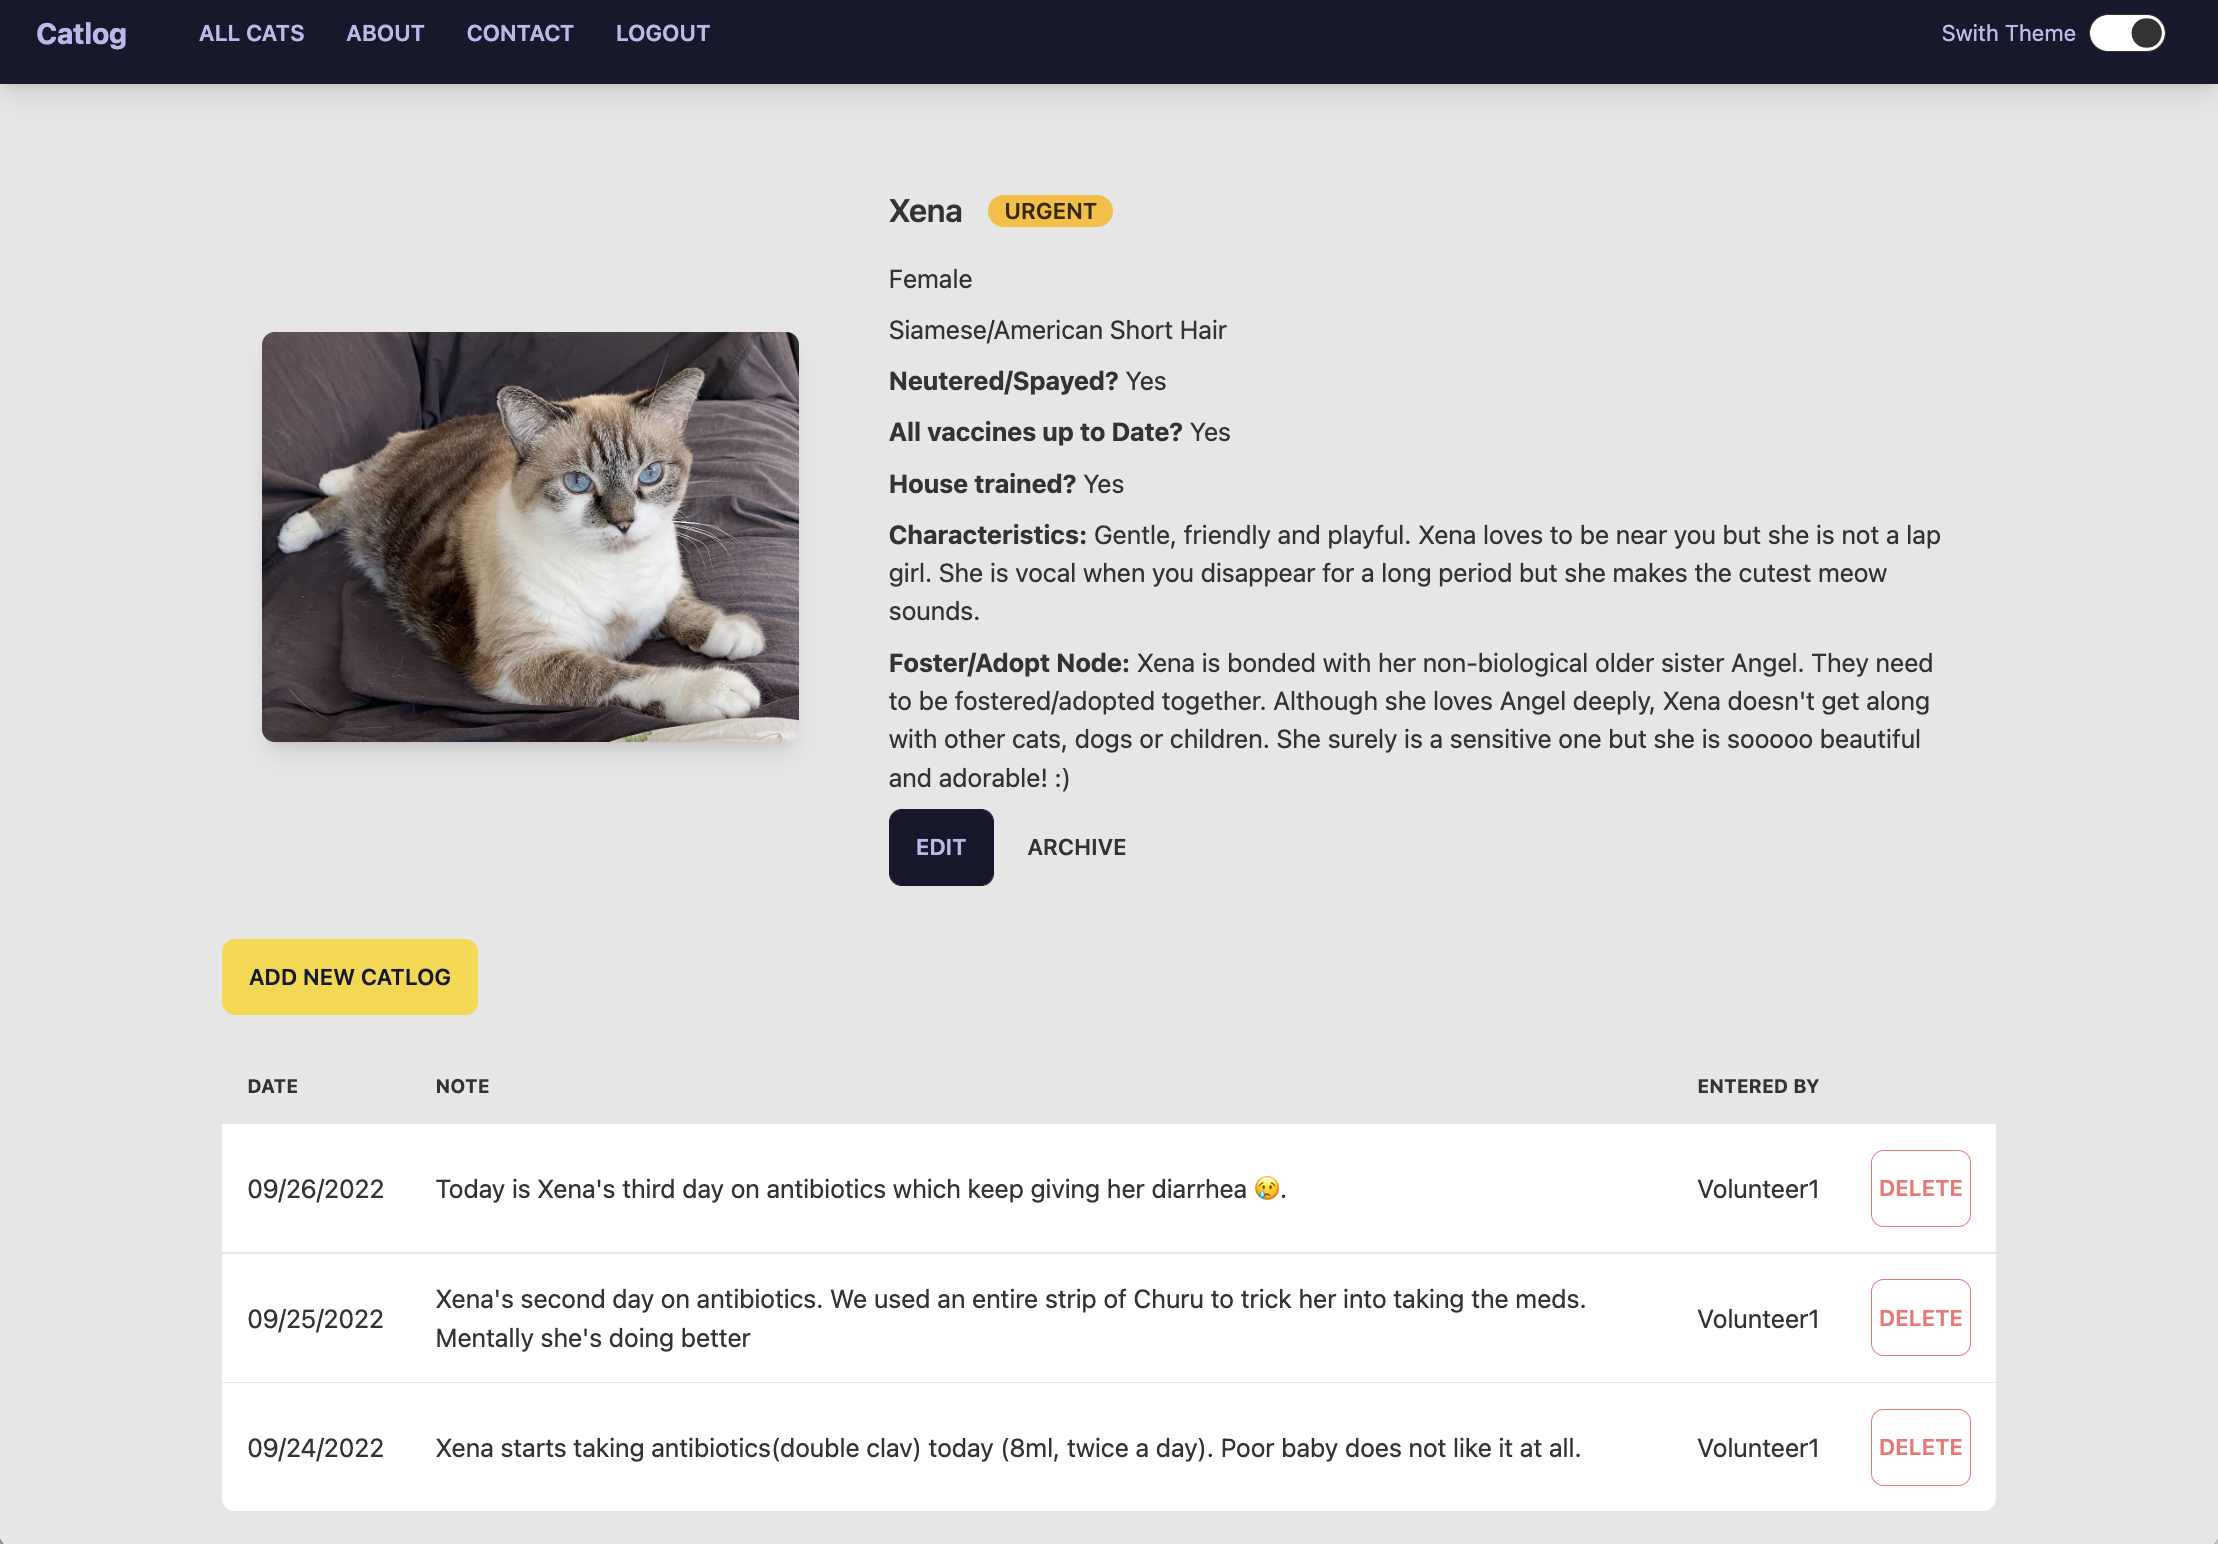 Screen Shot Cat Page with Add New Catlog Button and Delete Buttons